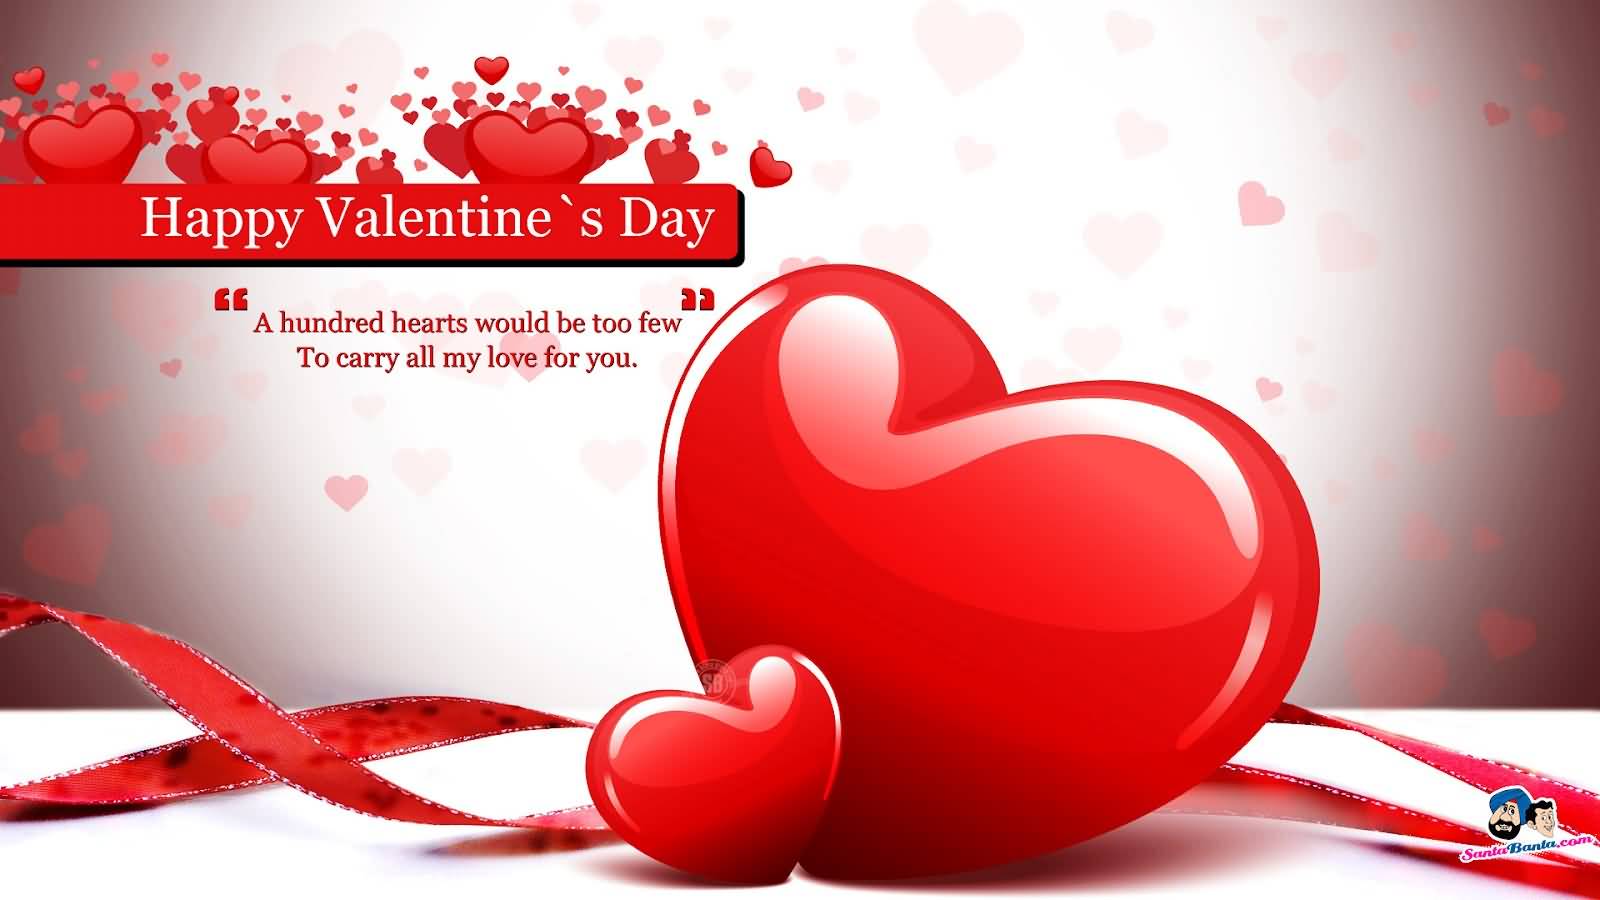 Happy Valentine's Day A Hundred Hearts Would Be Too Few To Carry All My Love For You Card